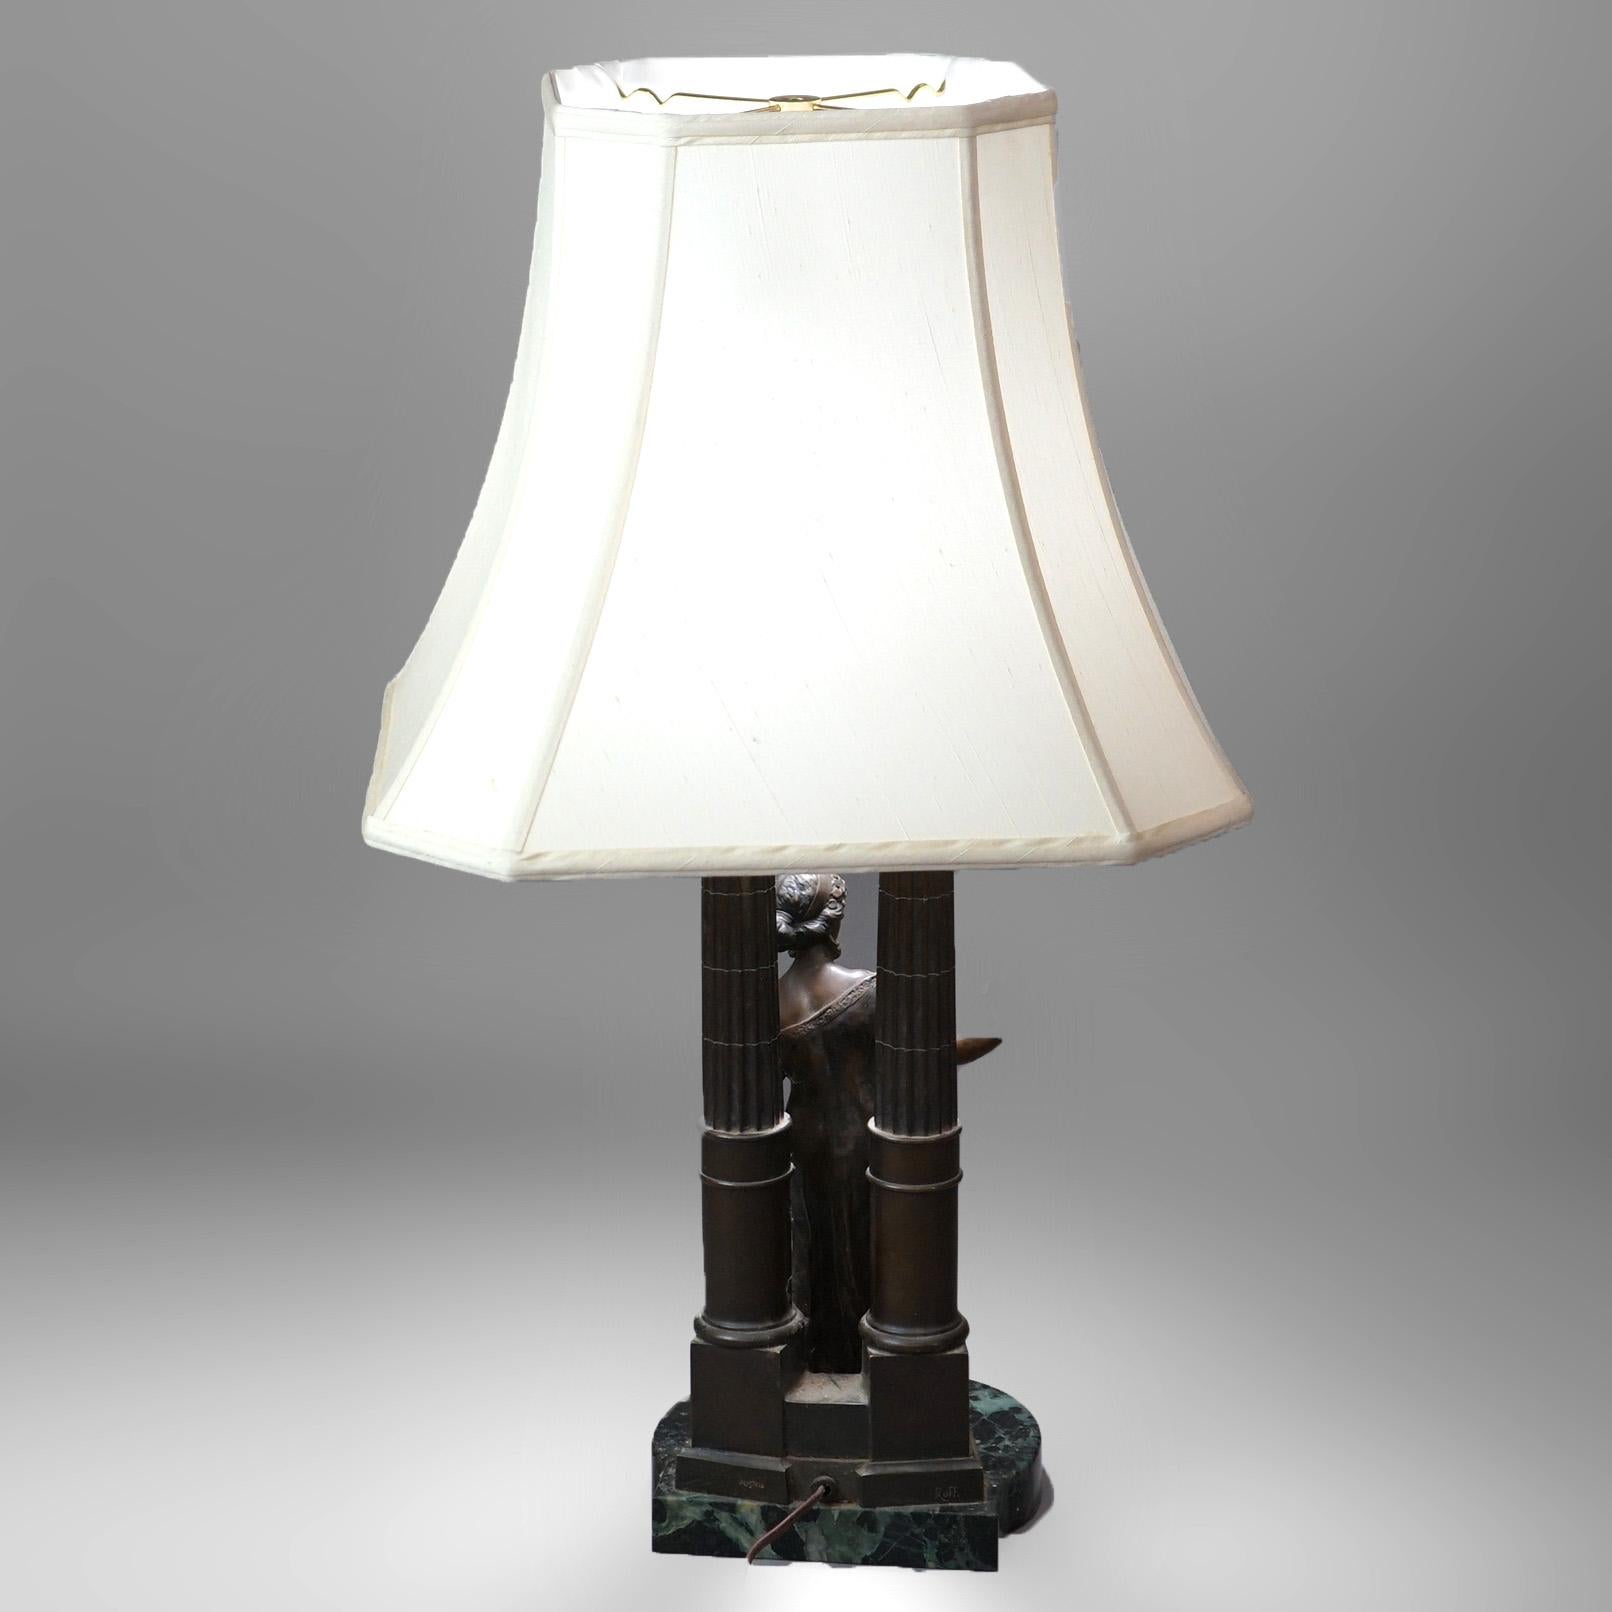 Antique Figural Bronzed Metal Classical Maiden Table Lamp on Marble Plinth c1910 For Sale 5